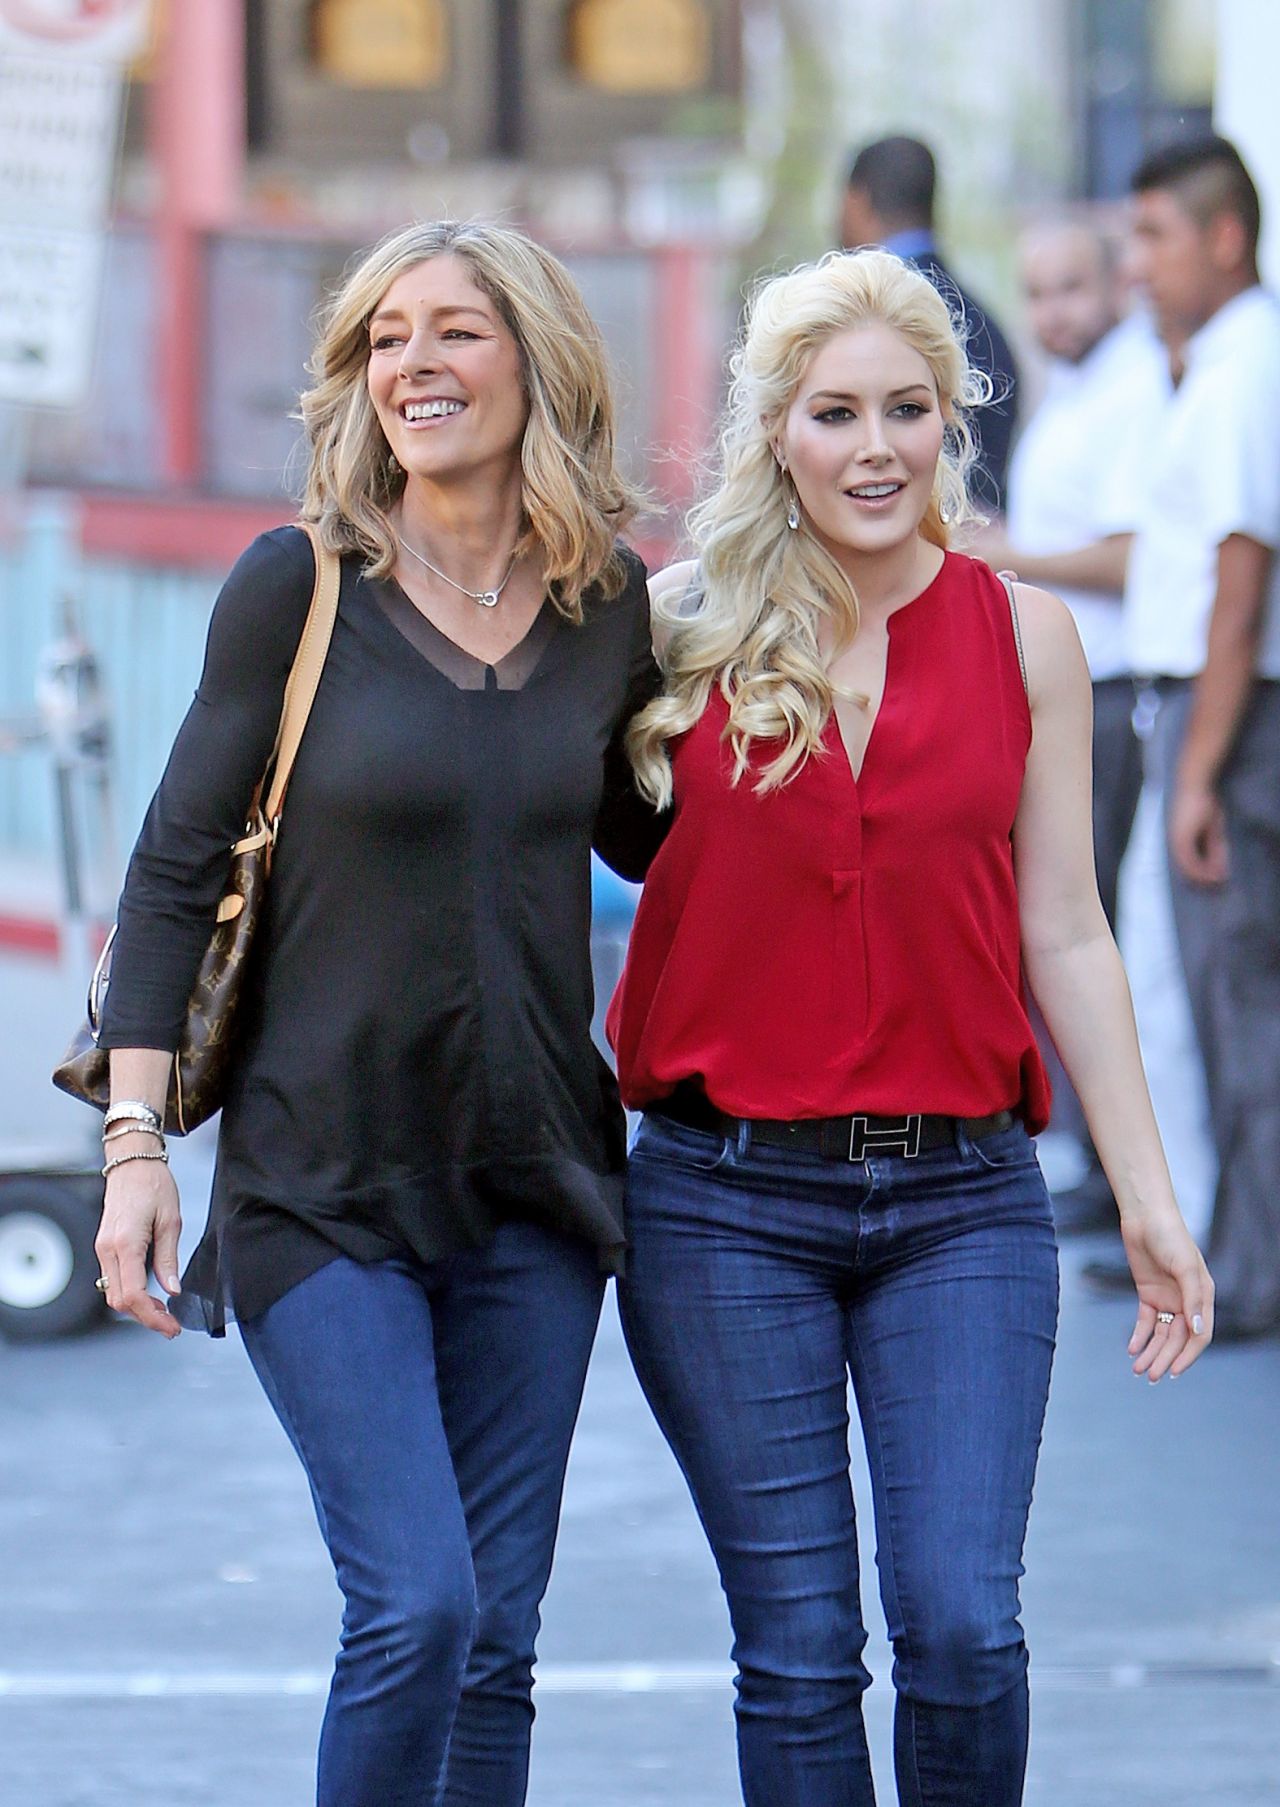 Heidi Montag Out For Lunch in West Hollywood May 1, 2009 – Star Style